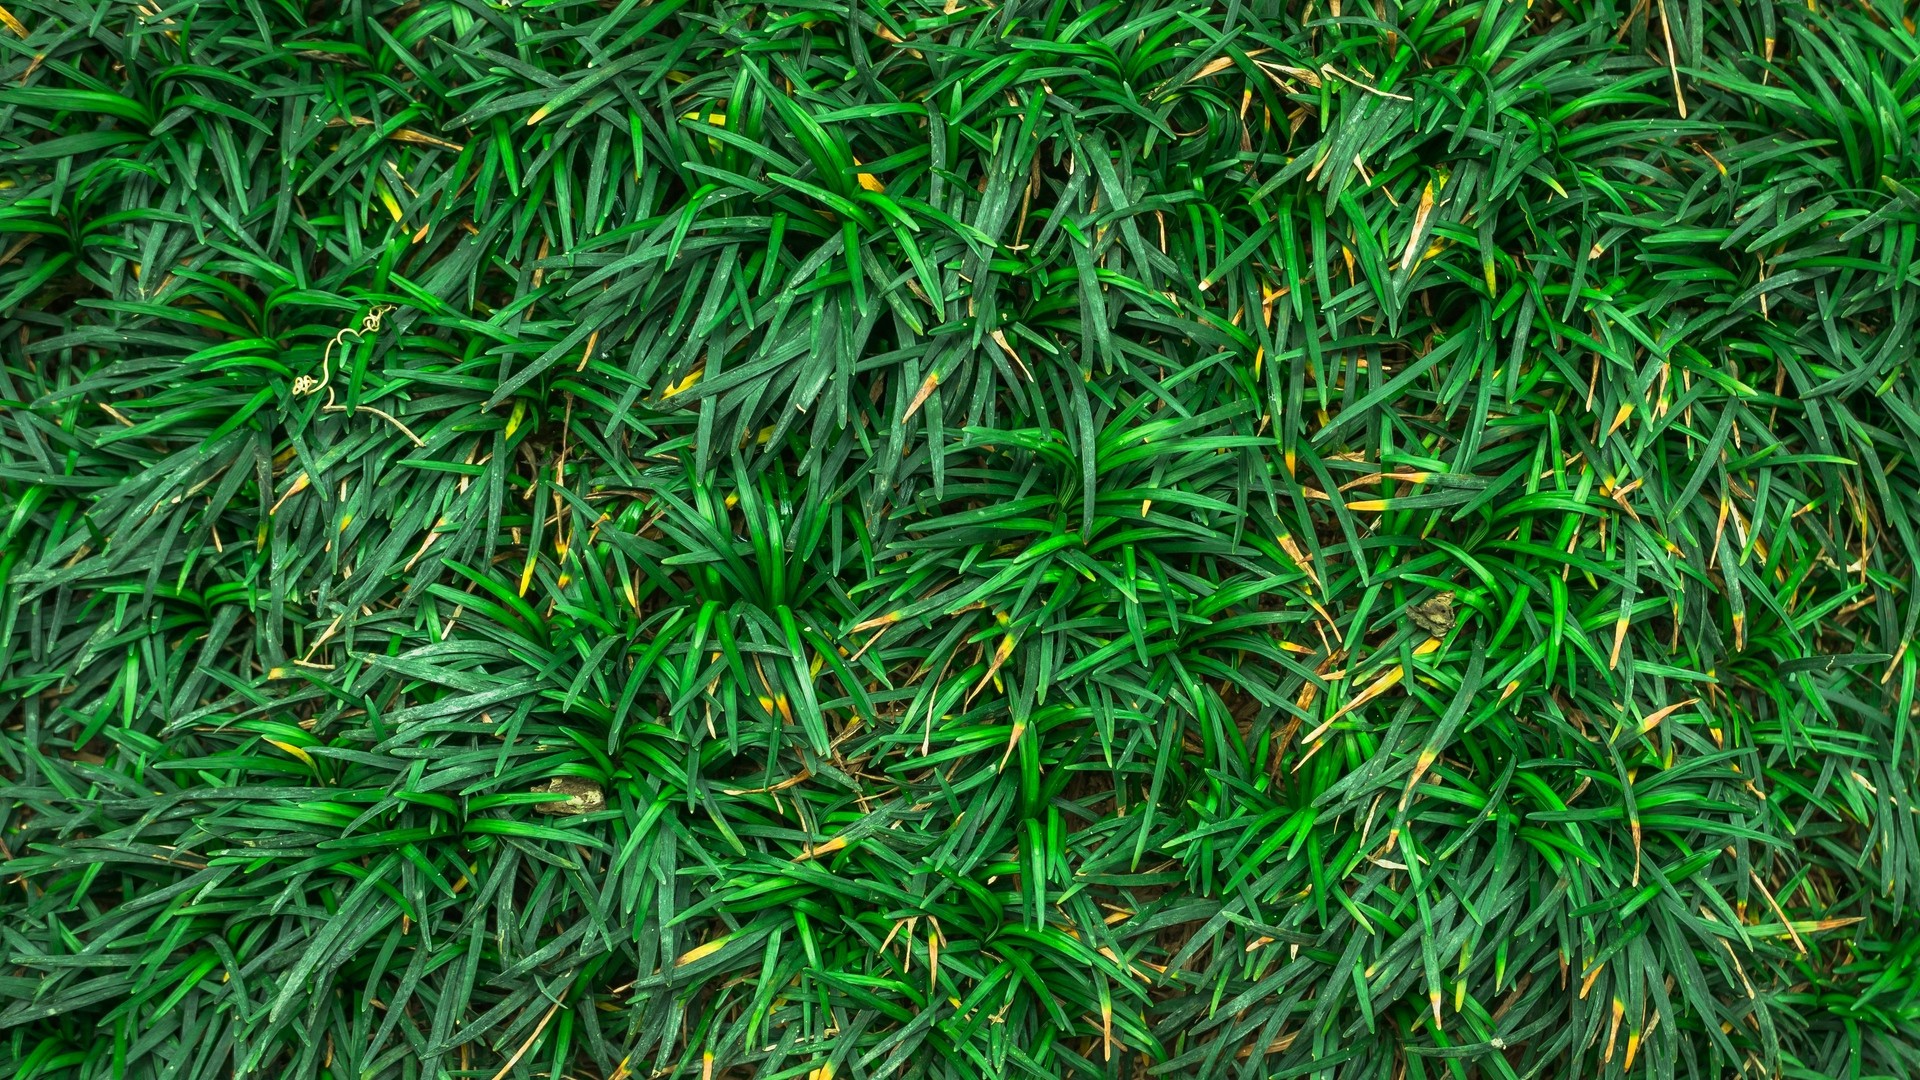 1920x1080 wallpapers: grass, close up, green (image)